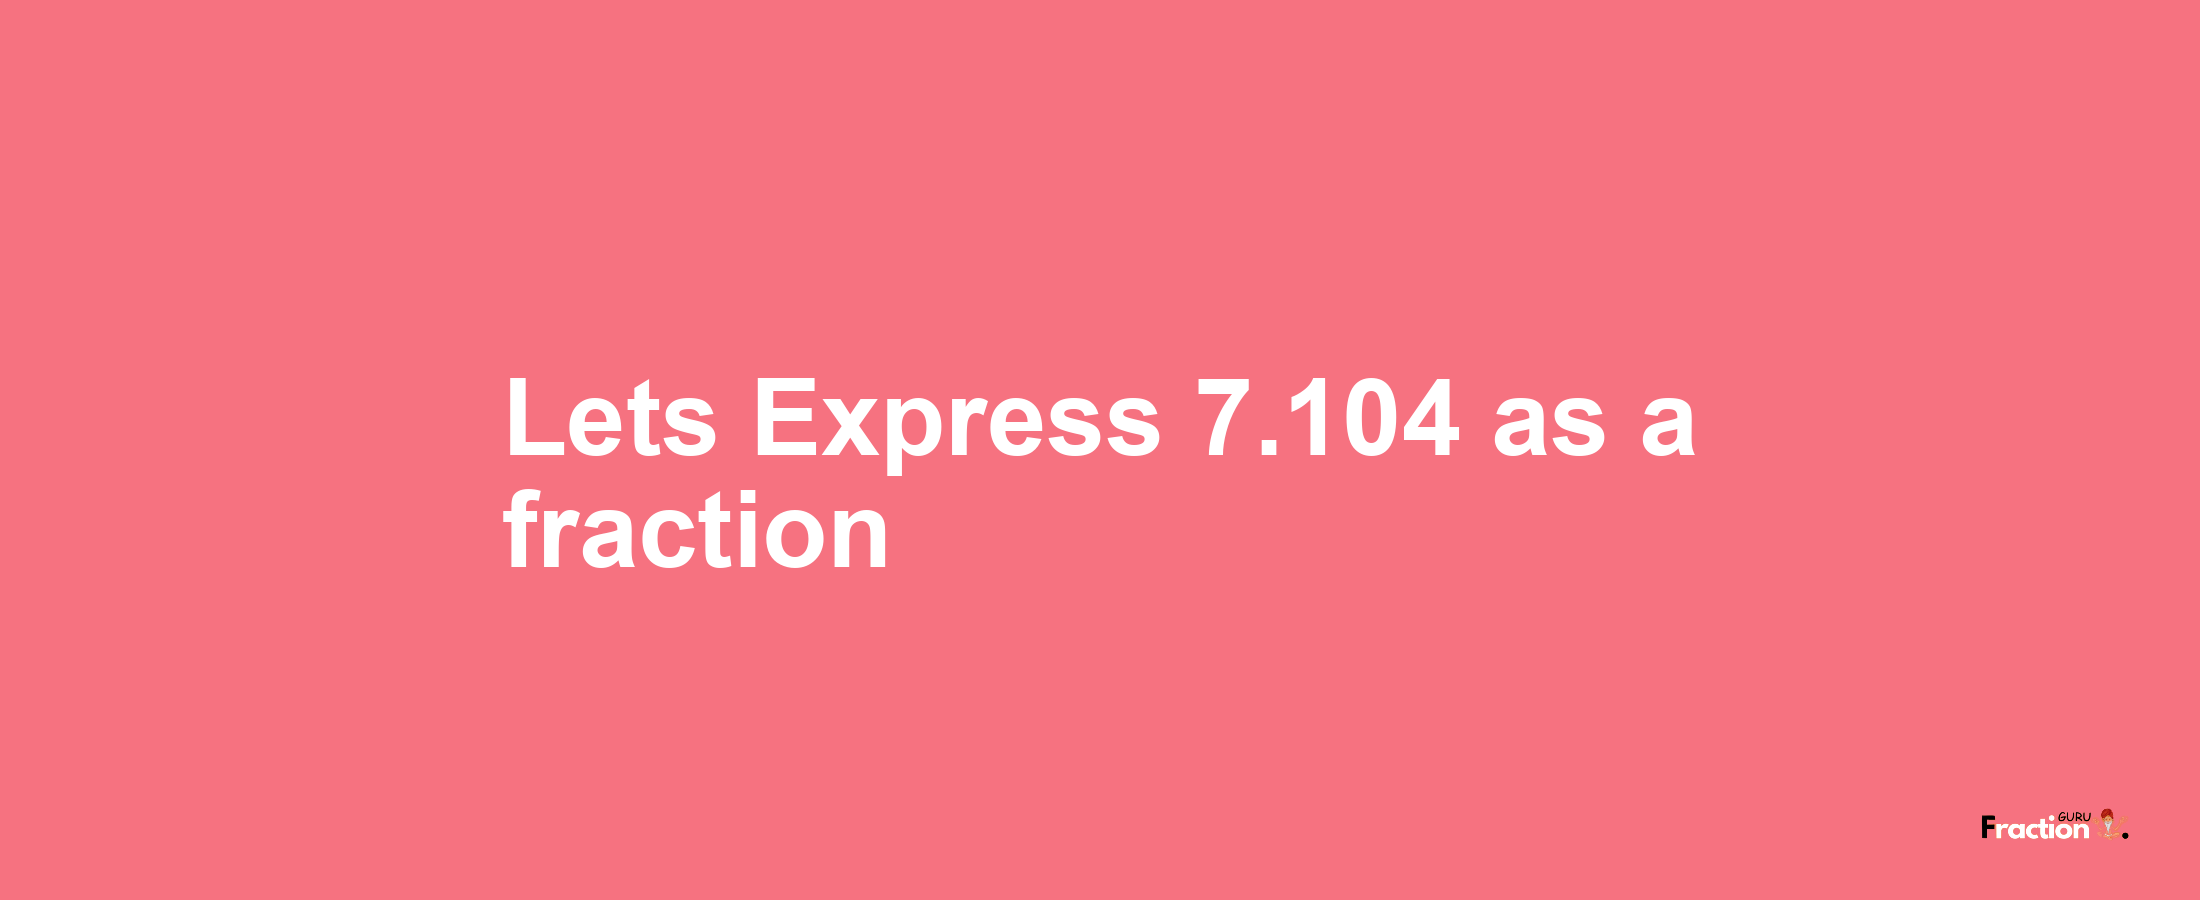 Lets Express 7.104 as afraction